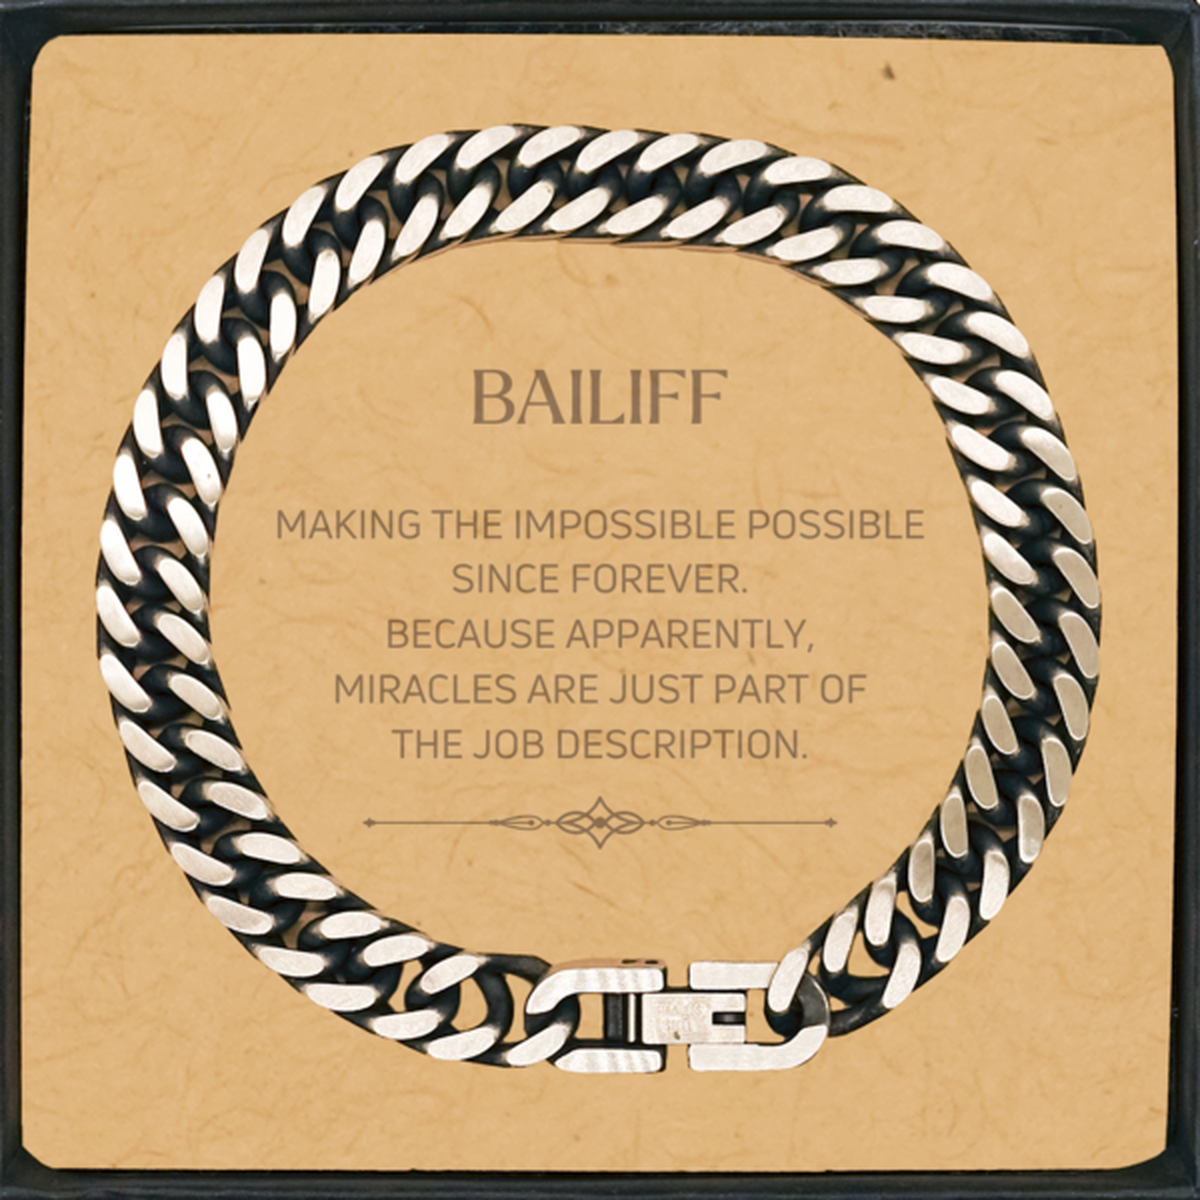 Funny Bailiff Gifts, Miracles are just part of the job description, Inspirational Birthday Cuban Link Chain Bracelet For Bailiff, Men, Women, Coworkers, Friends, Boss